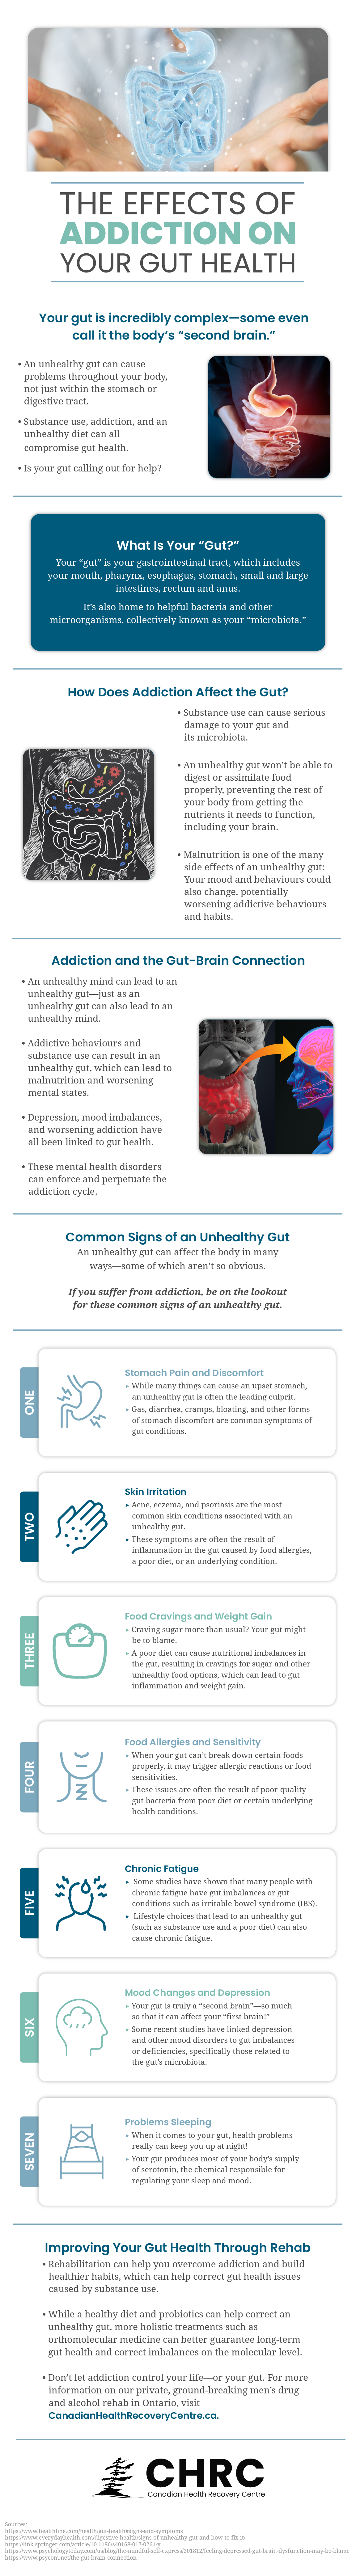 The Effects of Addiction on Your Gut Health Infographic